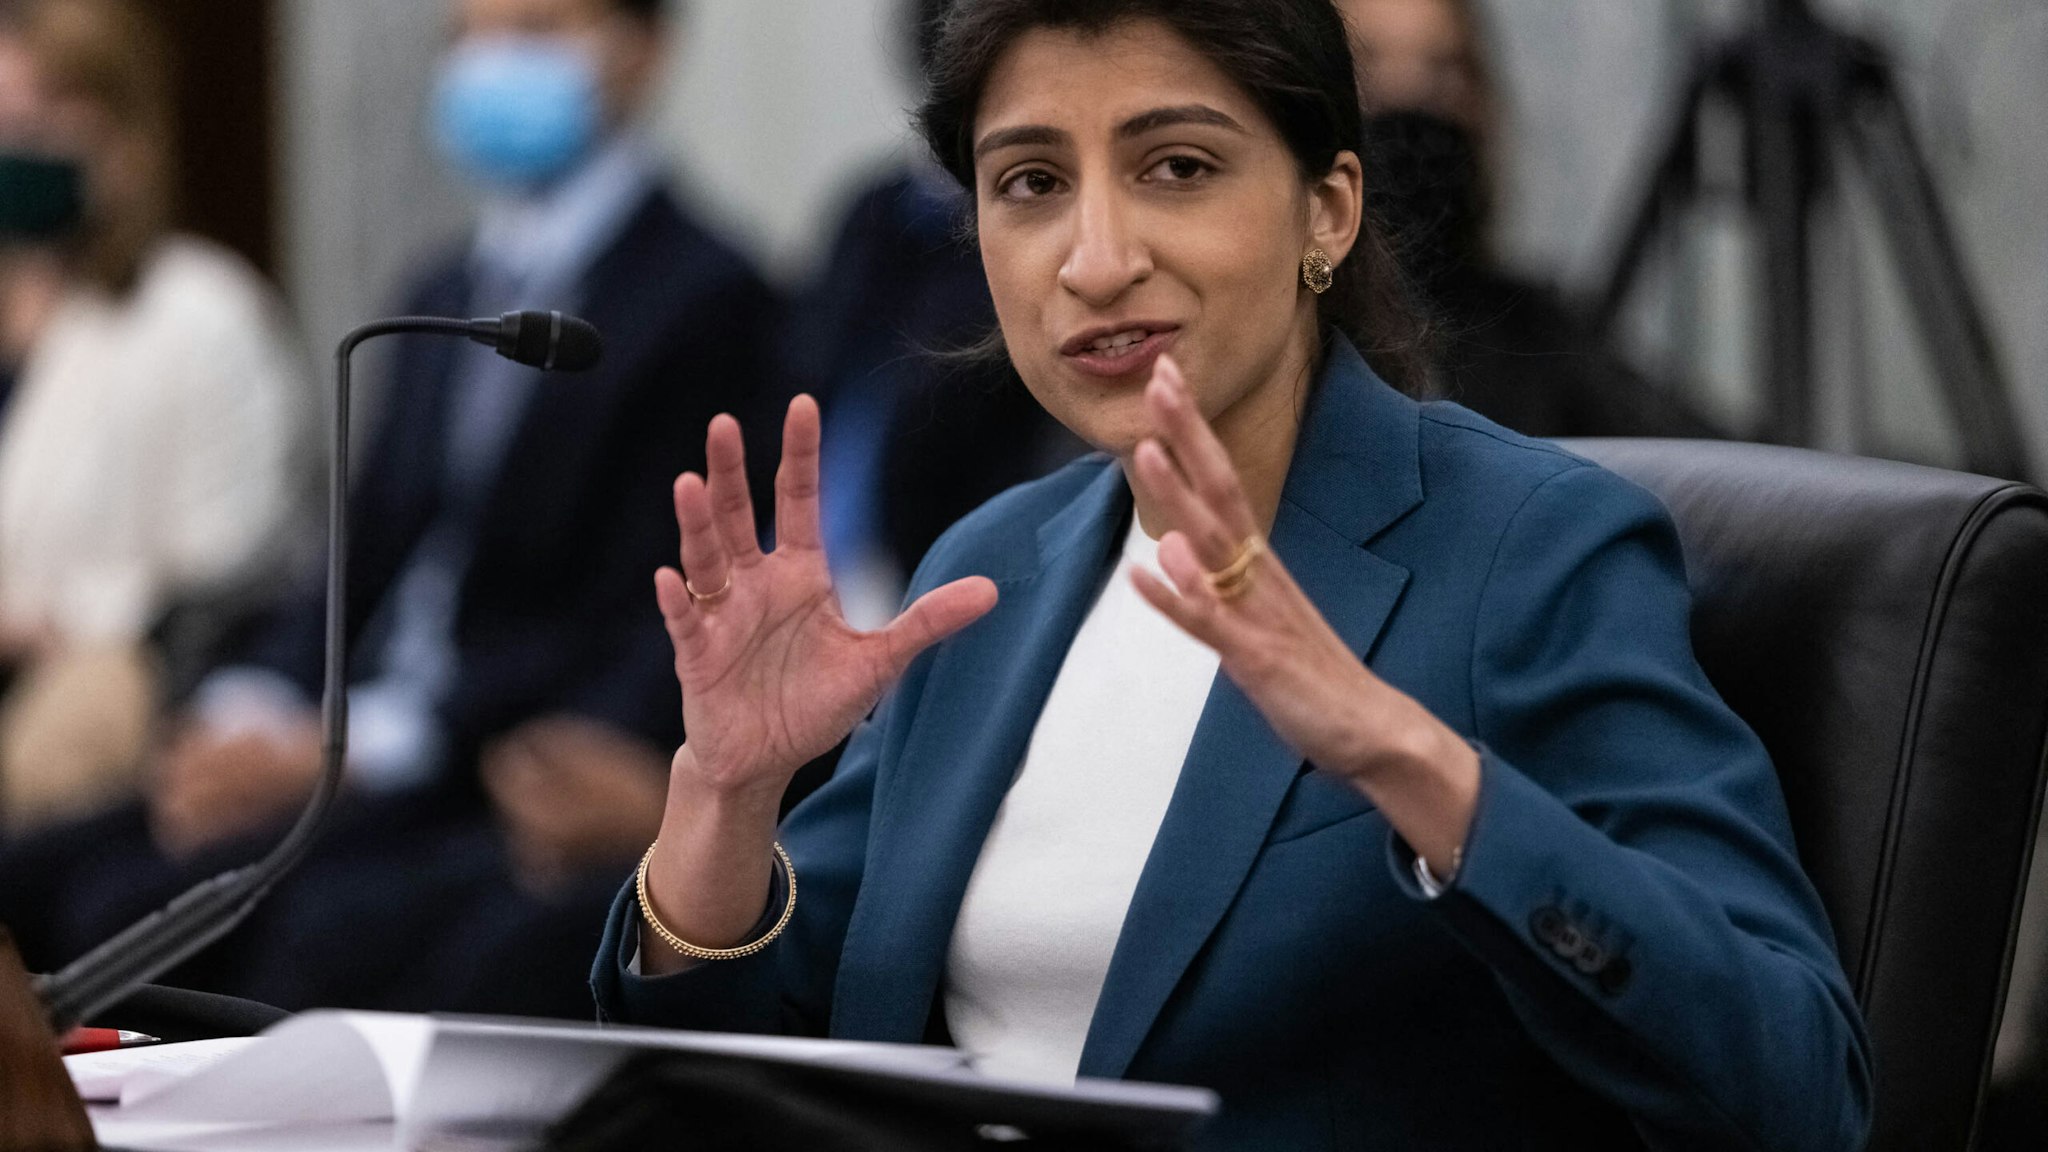 FTC Commissioner nominee Lina M. Khan testifies during a Senate Committee on Commerce, Science, and Transportation confirmation hearing on Capitol Hill in Washington, DC, April 21, 2021.